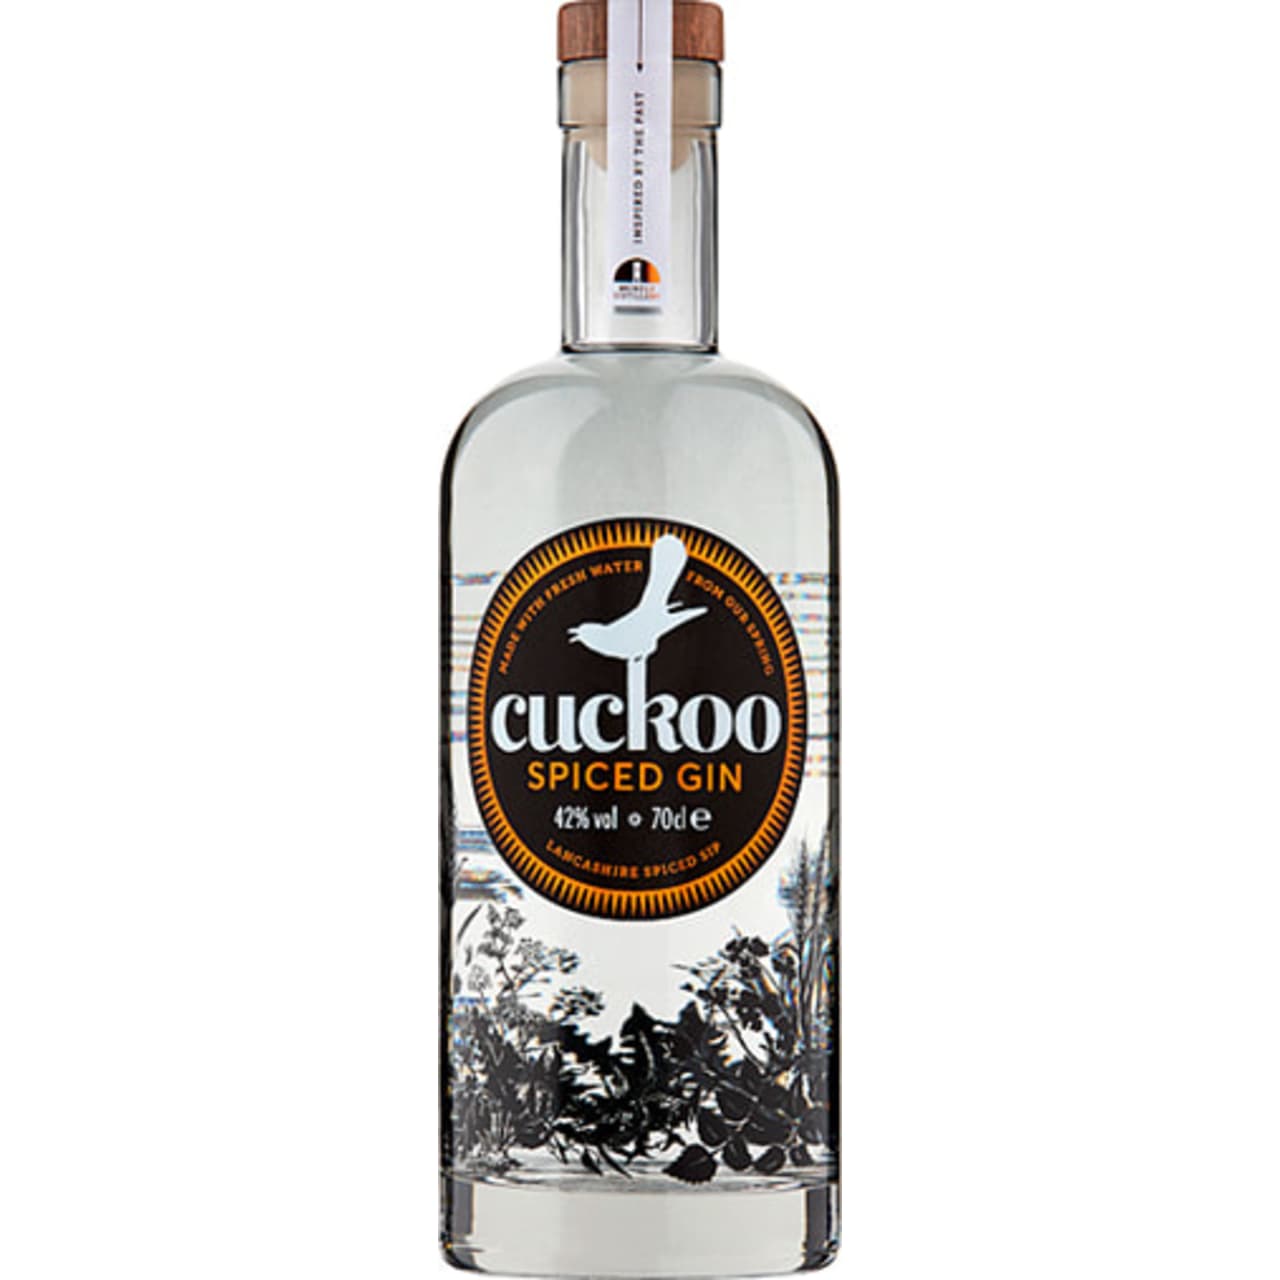 Cuckoo Spiced Gin is a fiery infusion of warming and aromatic sustainably sourced botanicals.